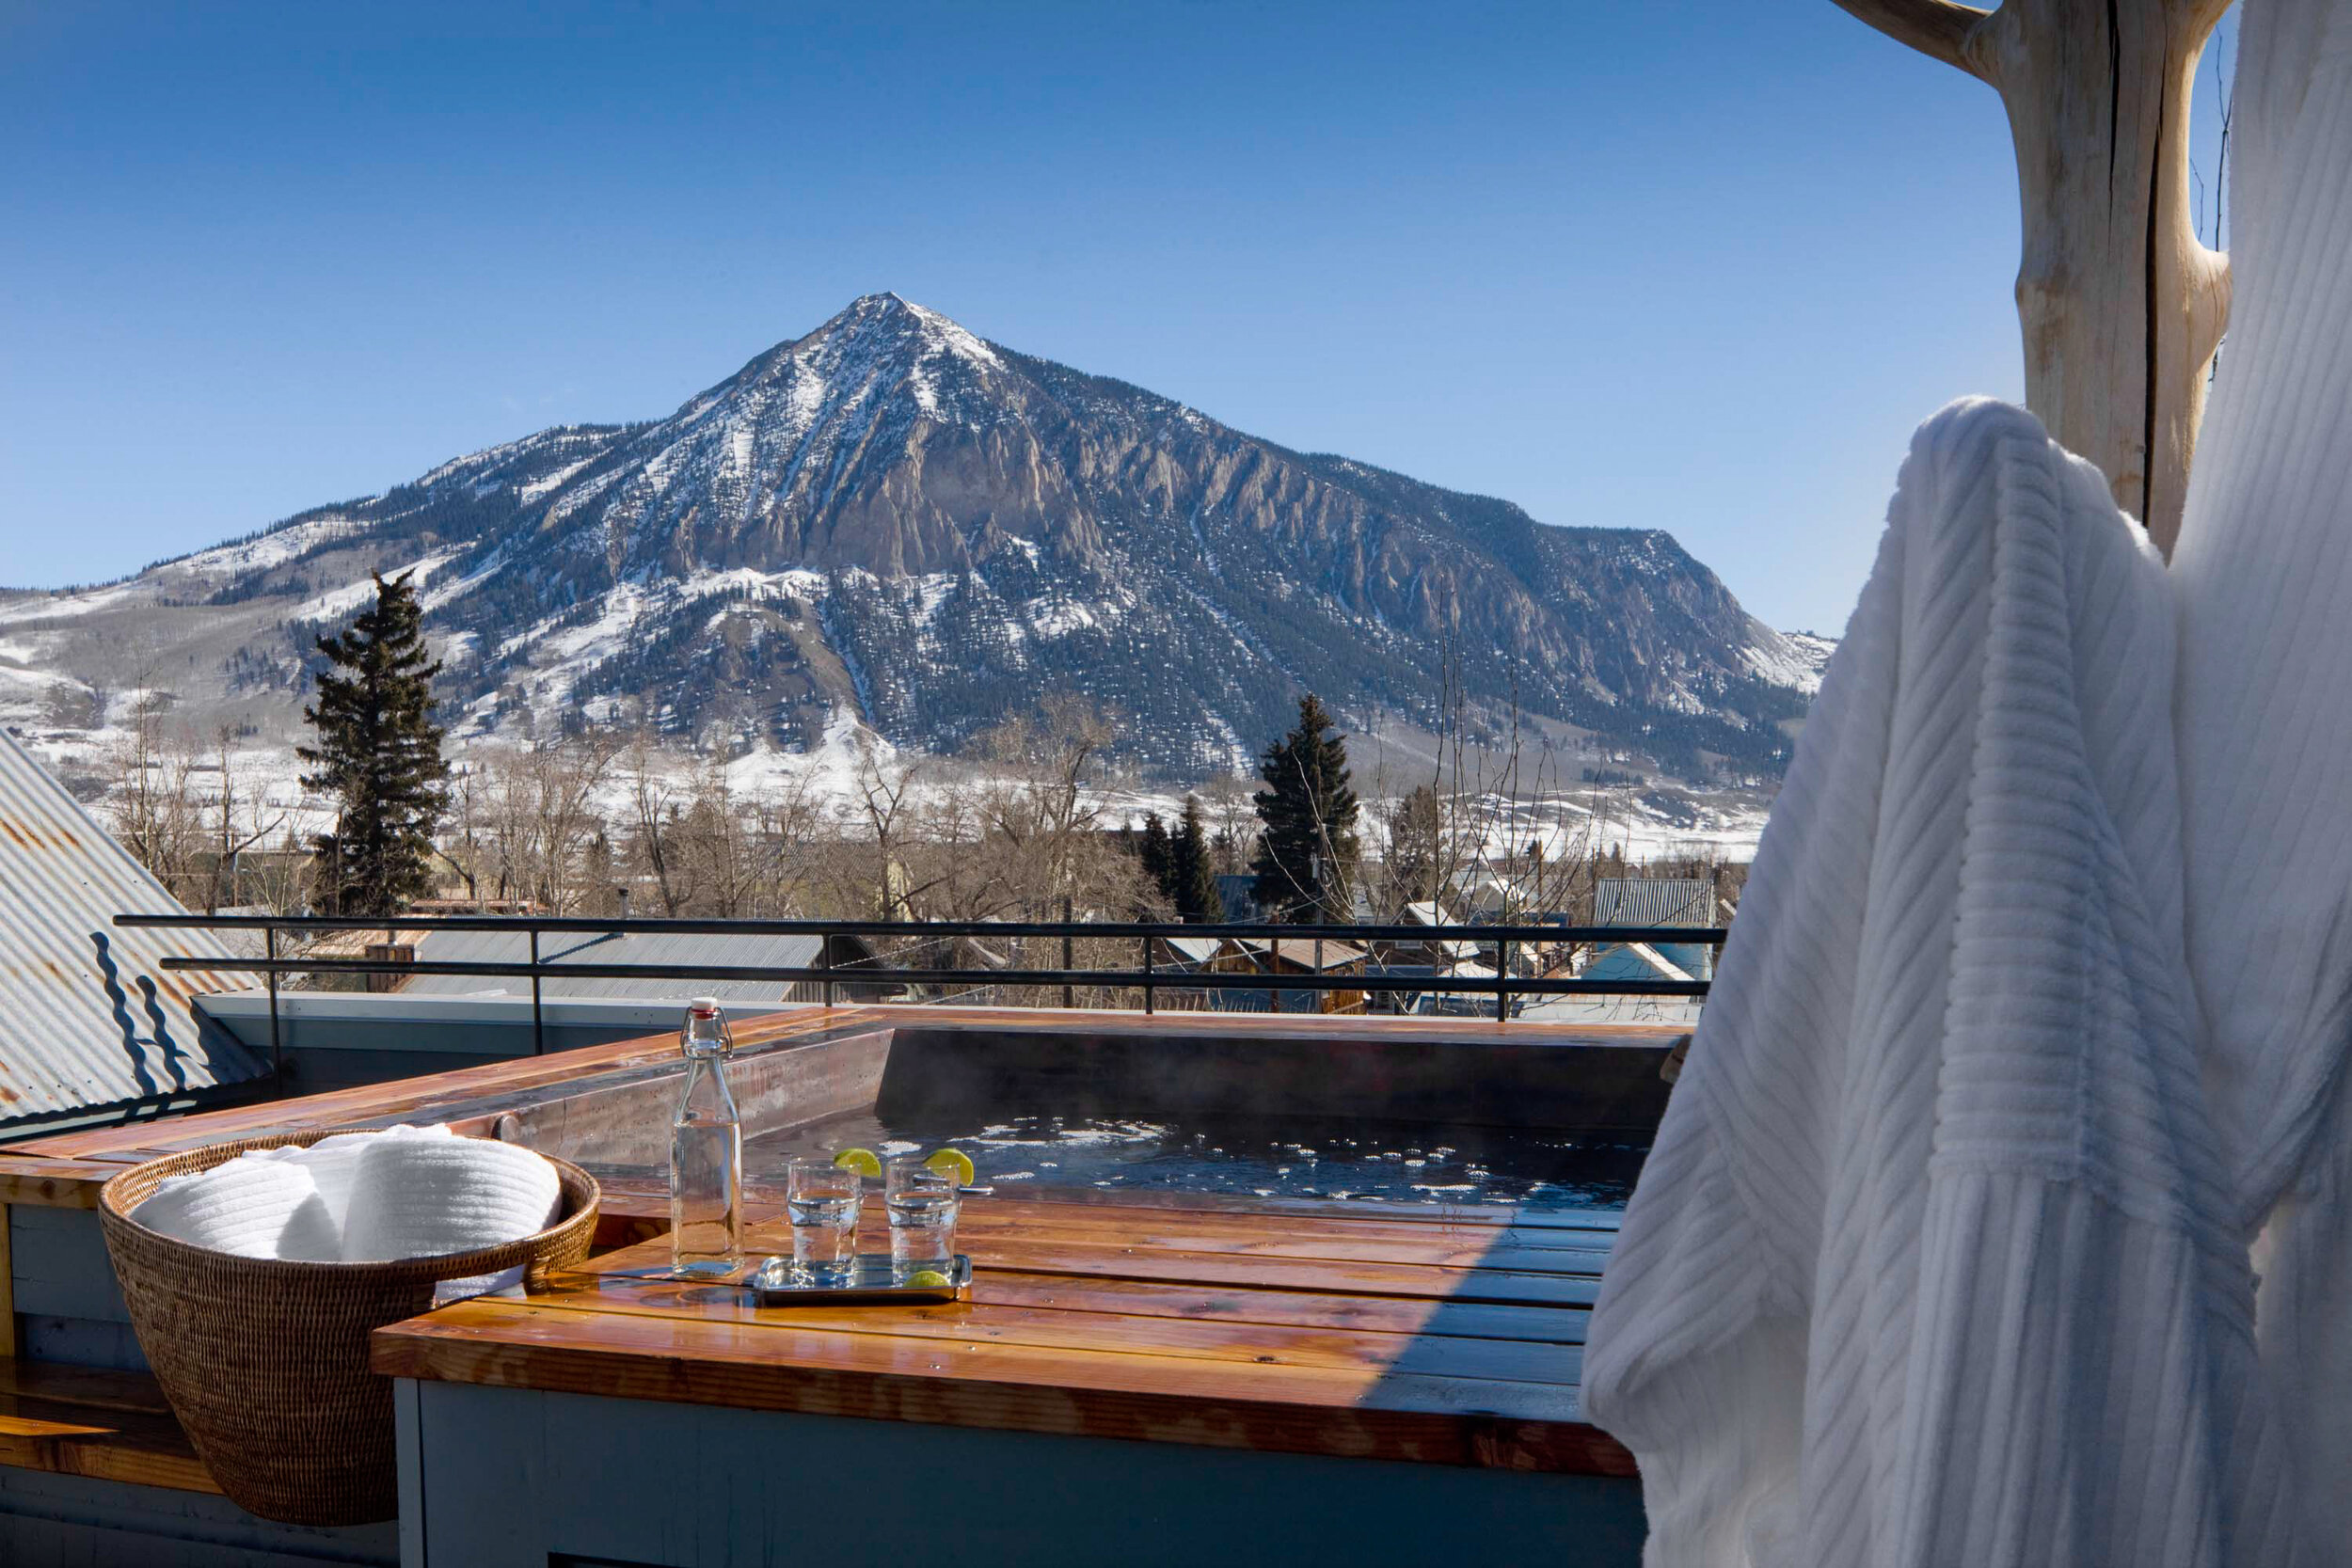   Incredible mountain views from the hot tub (photo credit: Eleven Experience)  